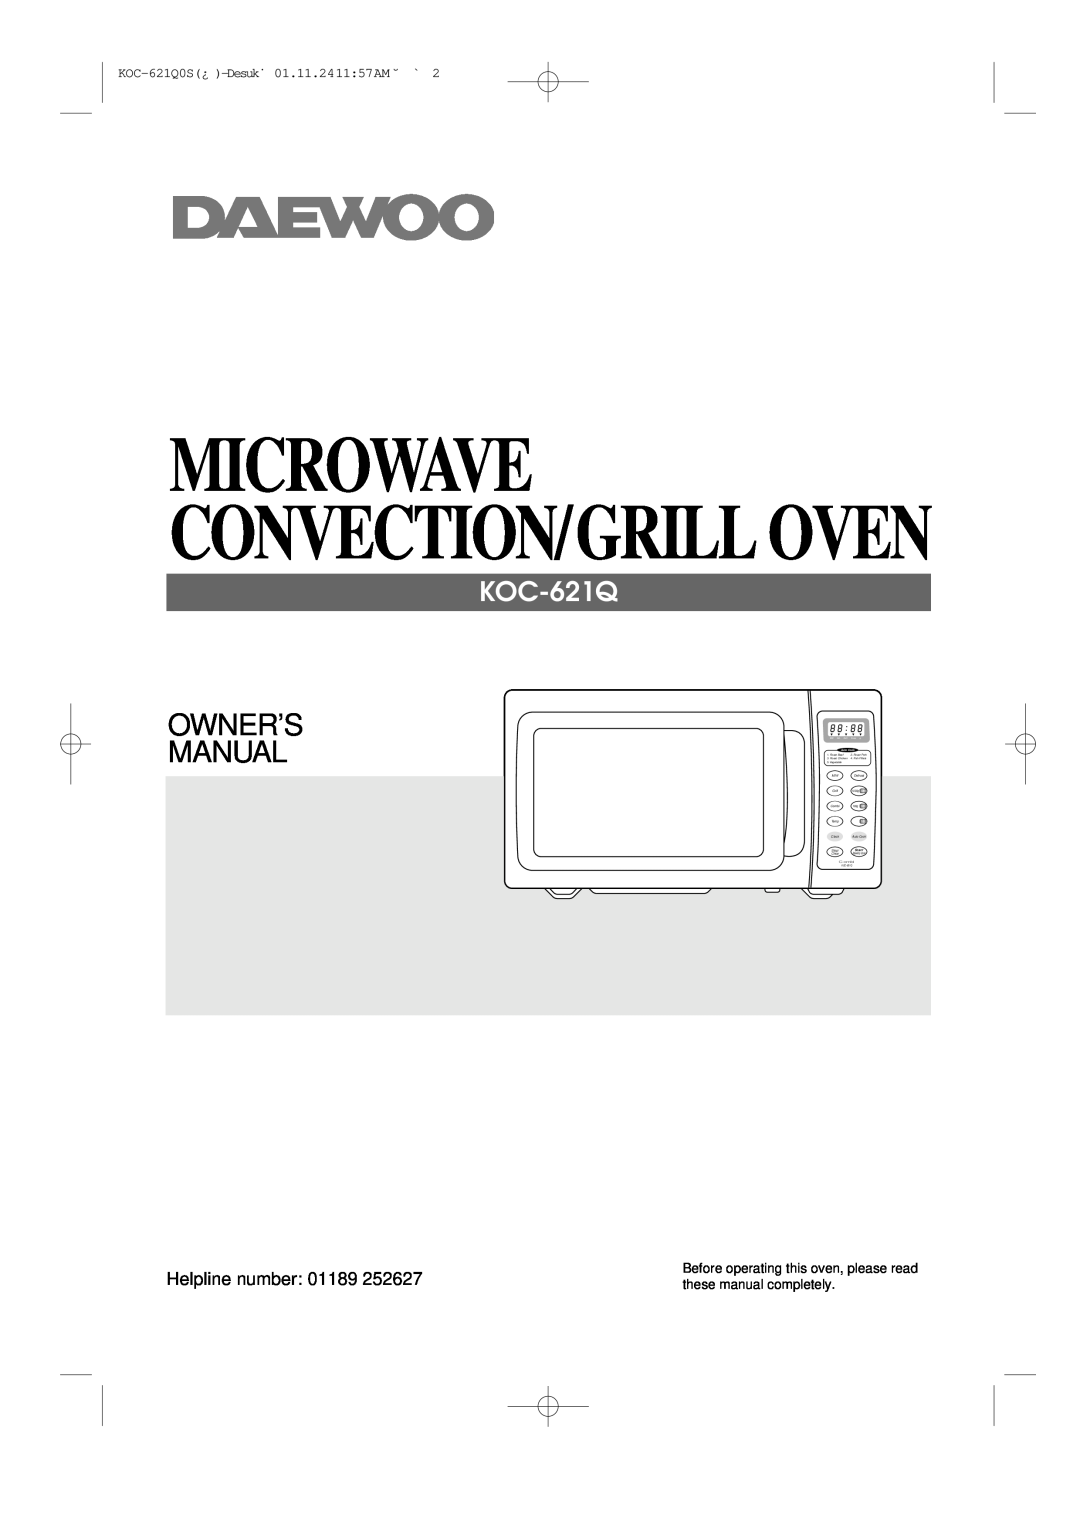 Daewoo owner manual Microwave Convection/Grill Oven, Helpline number, KOC-621Q0S¿ -Desuk˙ 01.11.241157AM ˘ `, Combi 